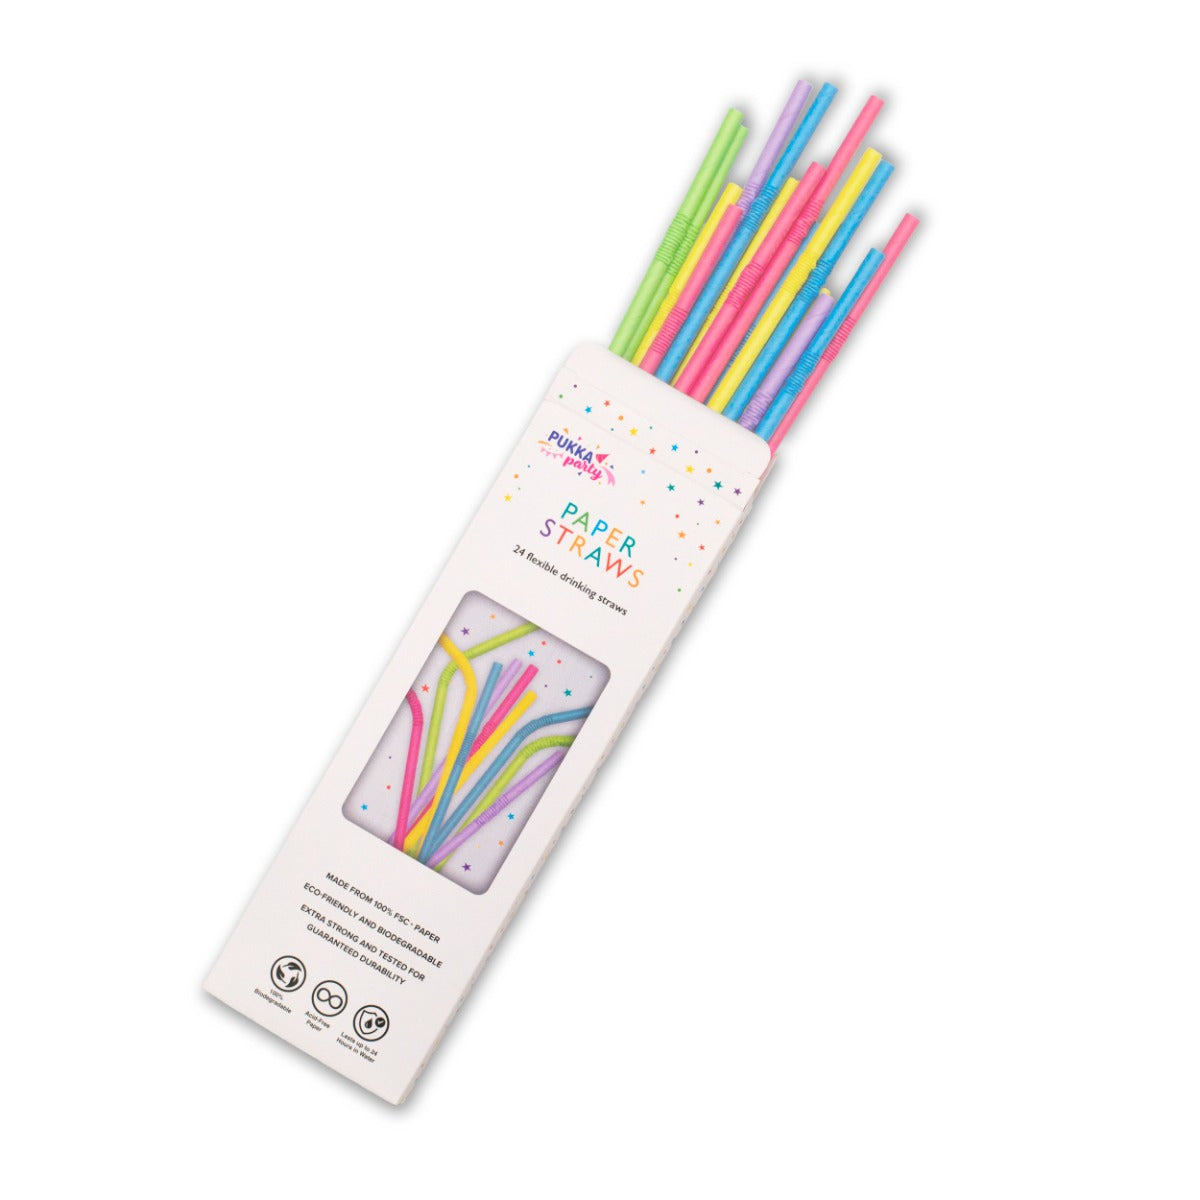 Pukka Party Coloured Flexible Drinking Straws - Assorted Pack of 24